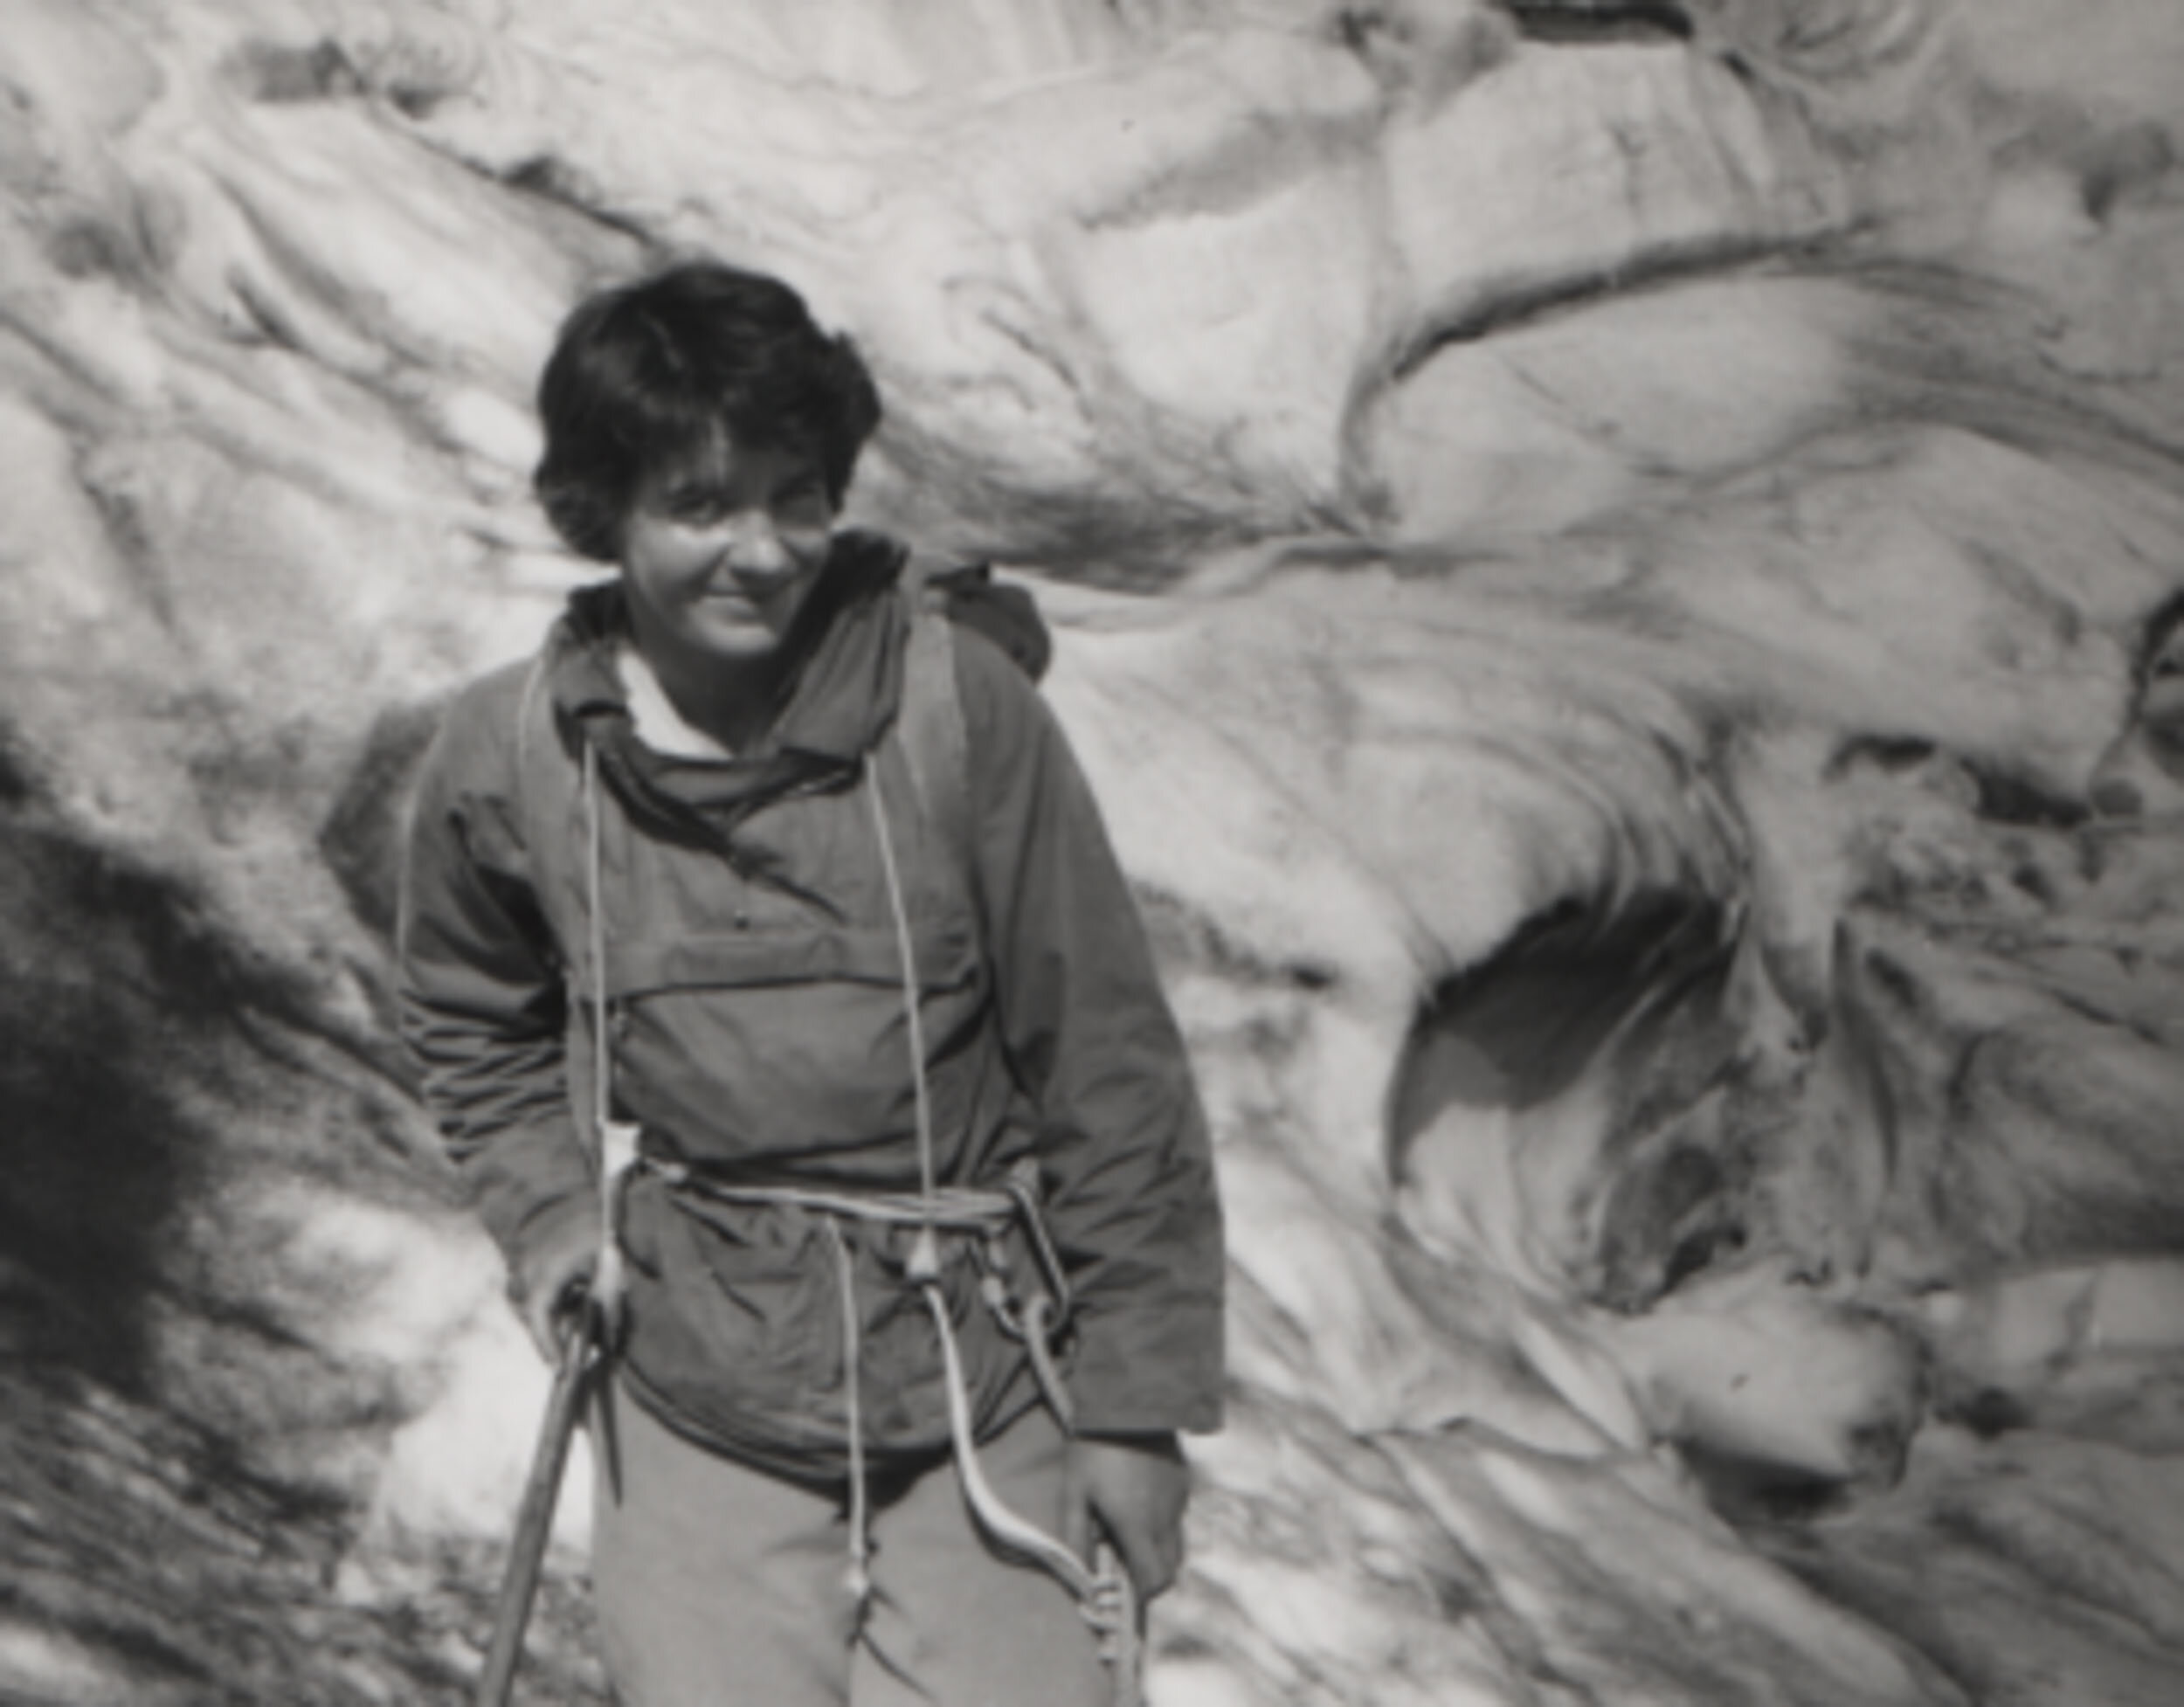 Pat Woods crossing a glacier in The Requin, French Alps, in 1964 